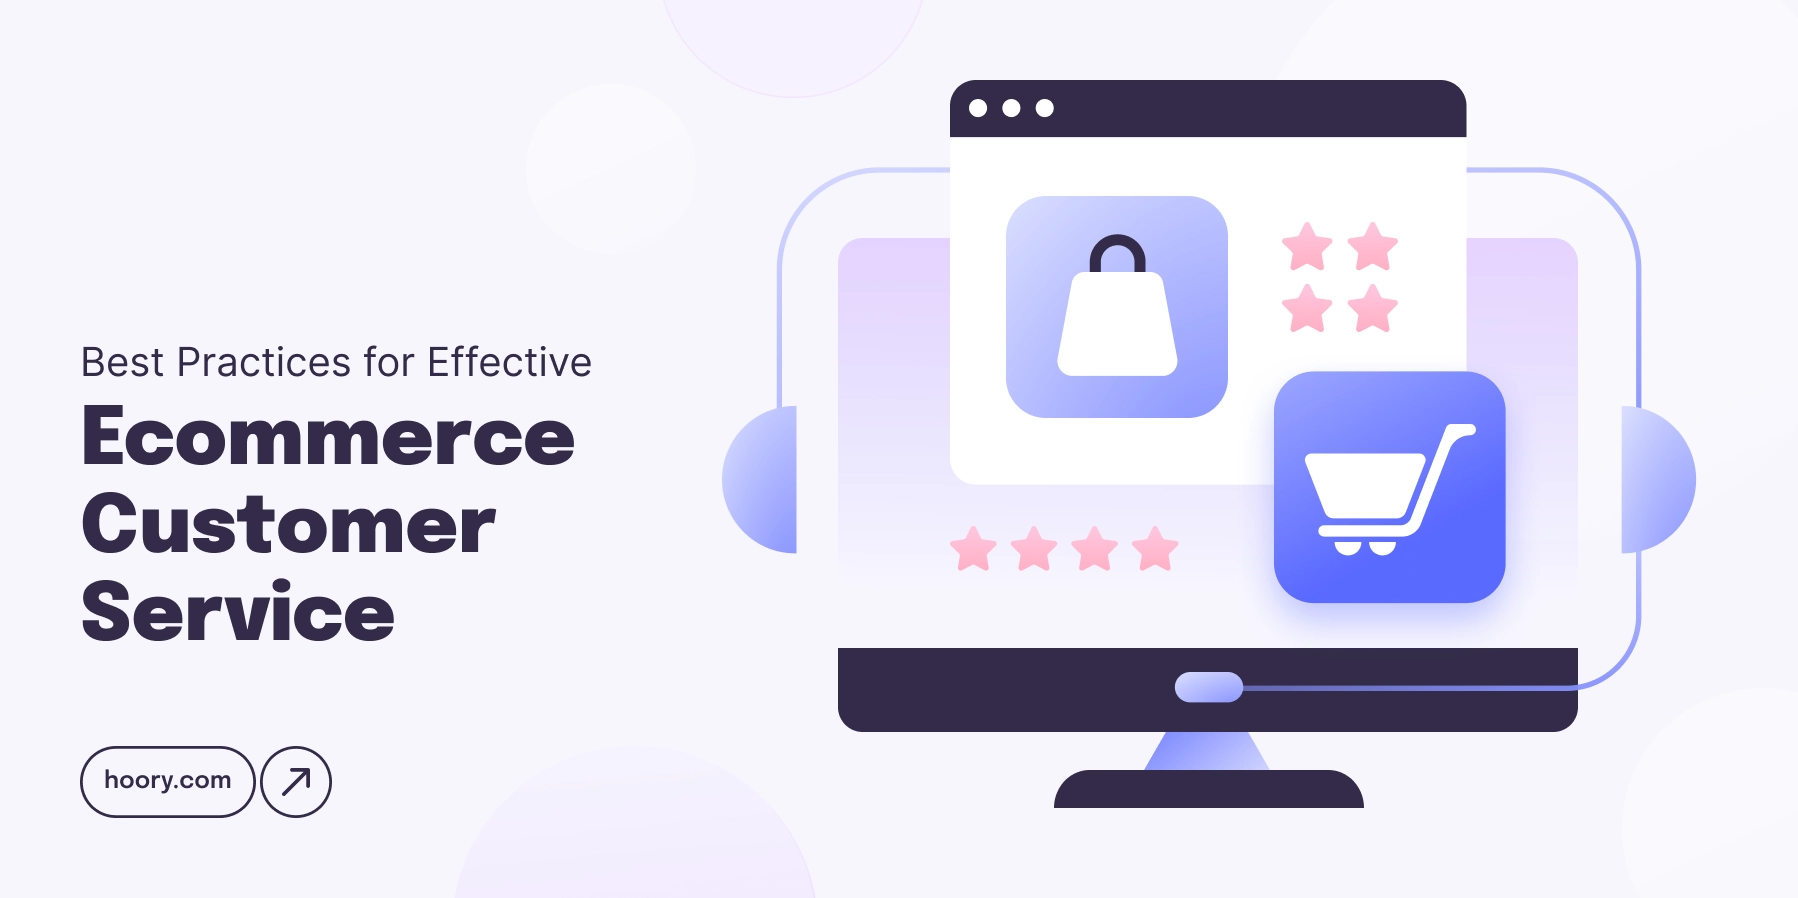 Best Practices for Effective Ecommerce Customer Service